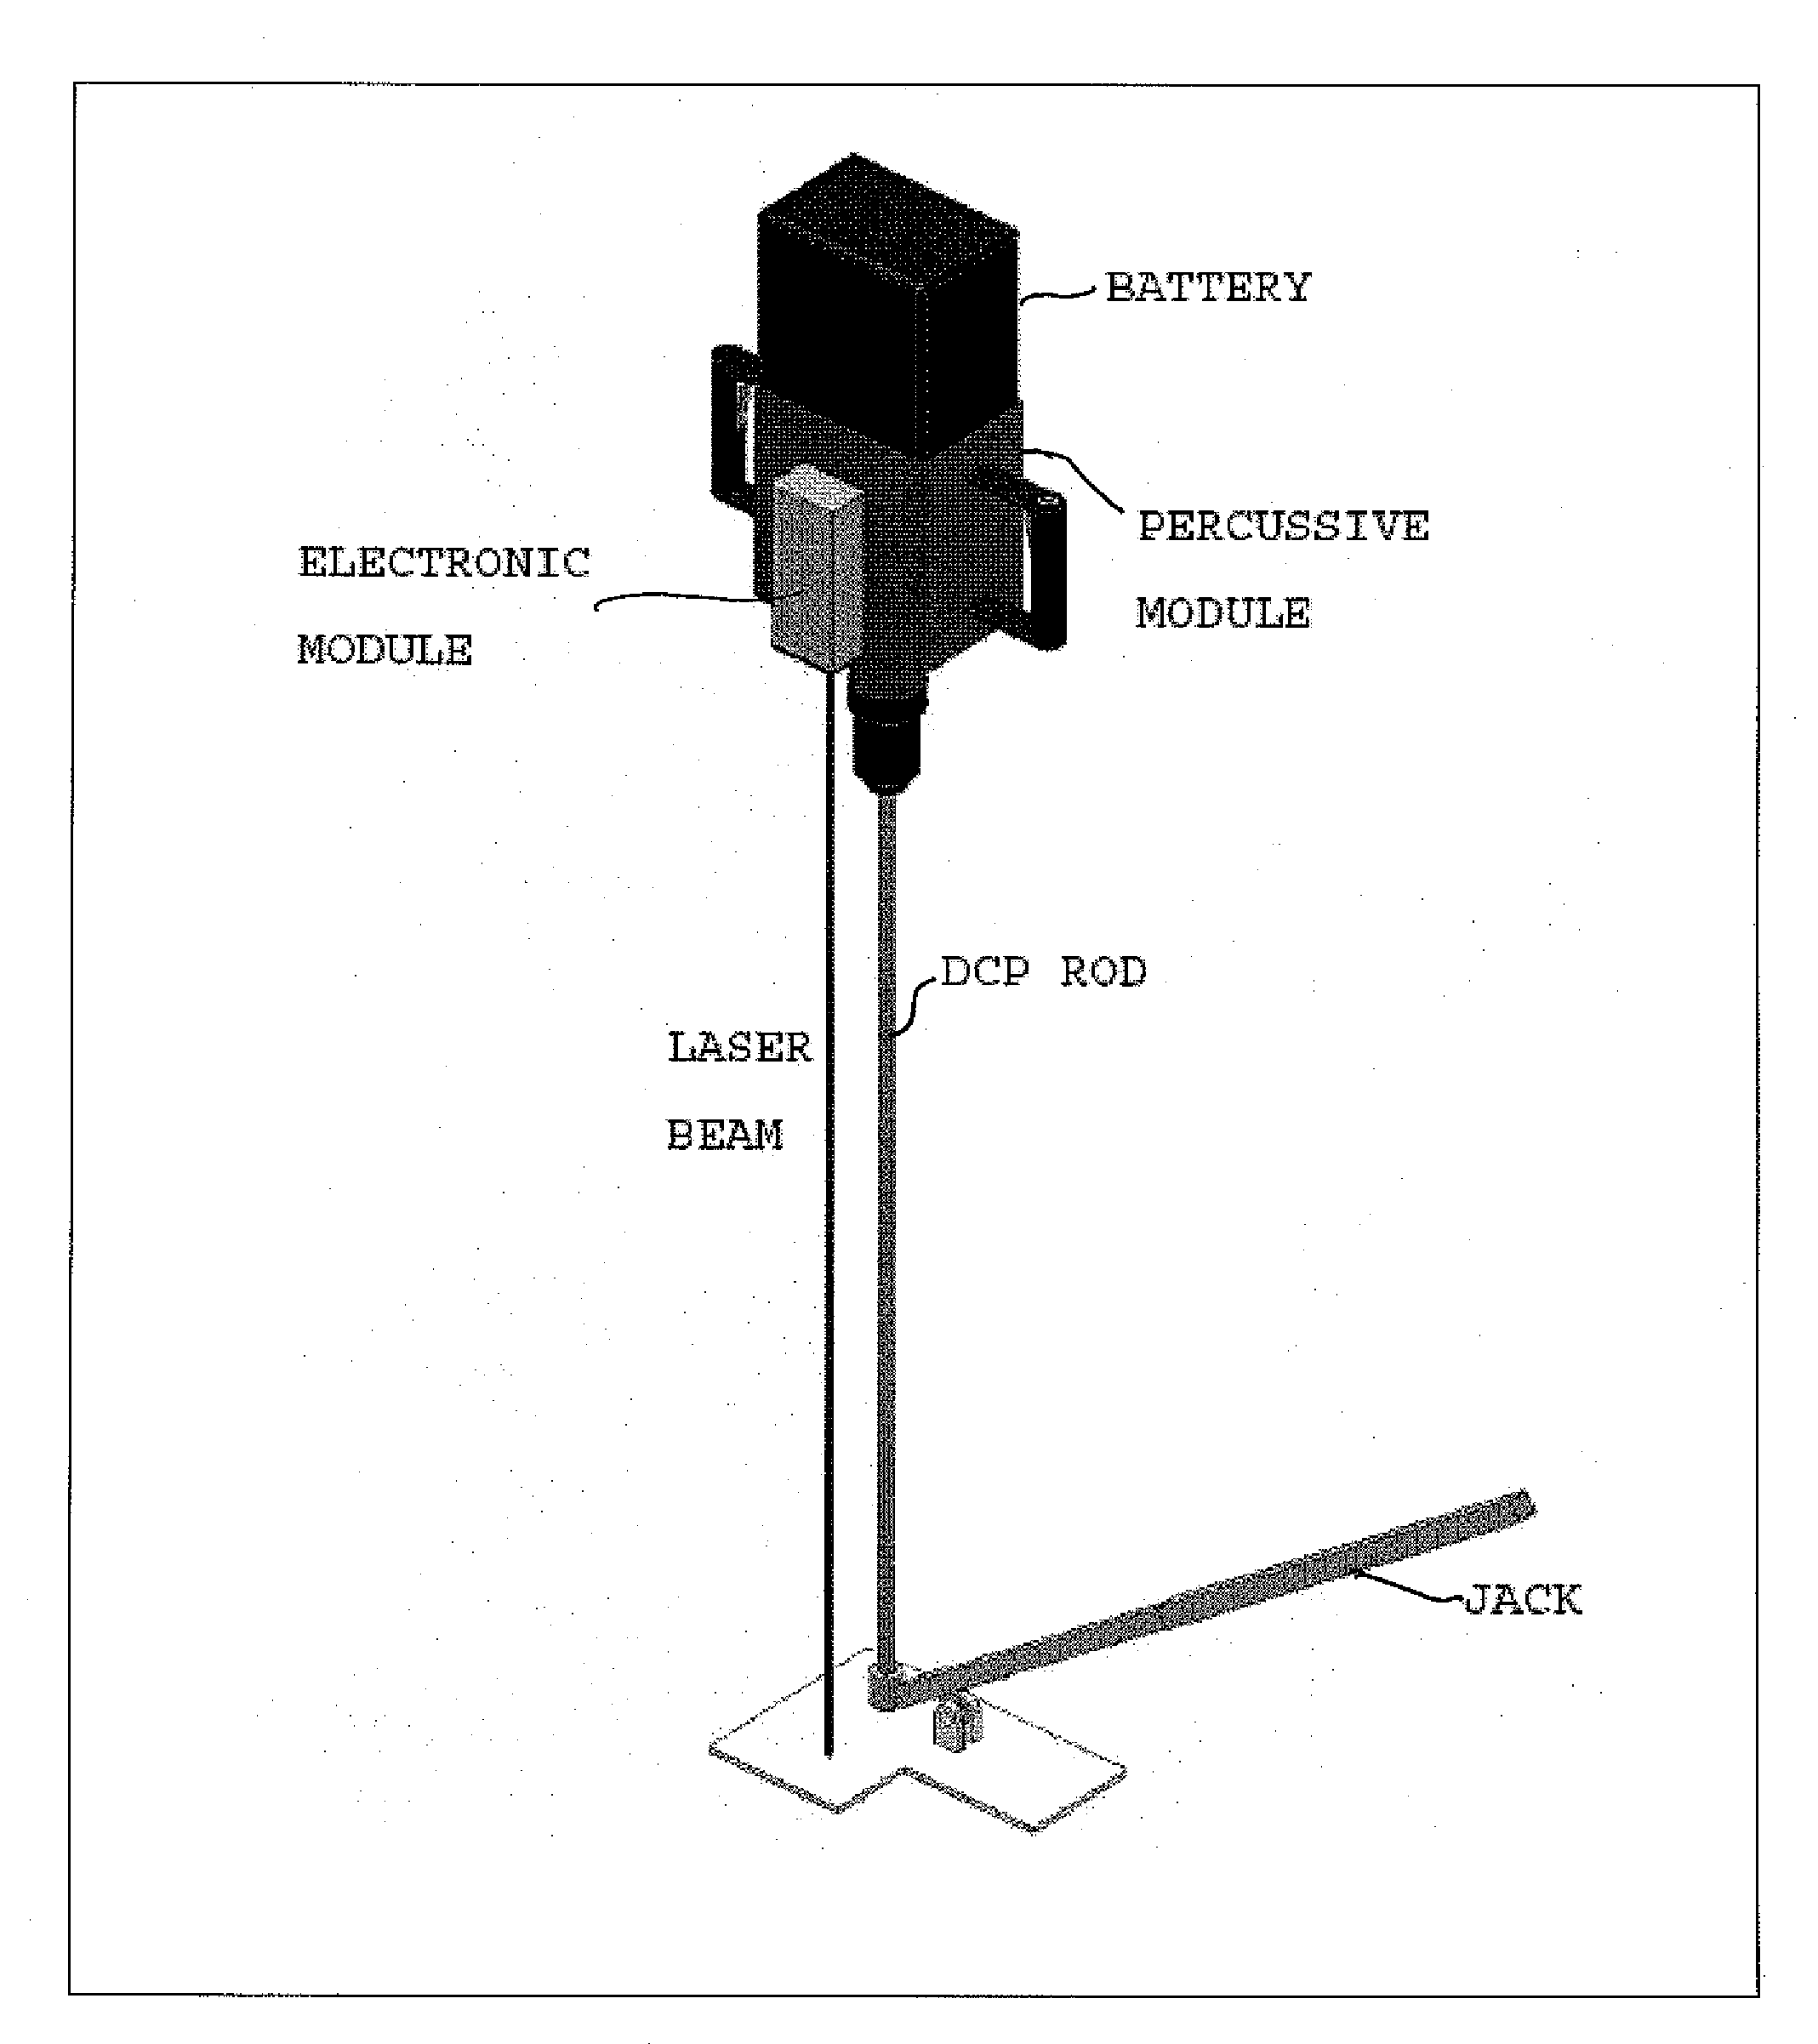 Penetrometer with electronically-controlled hammering module